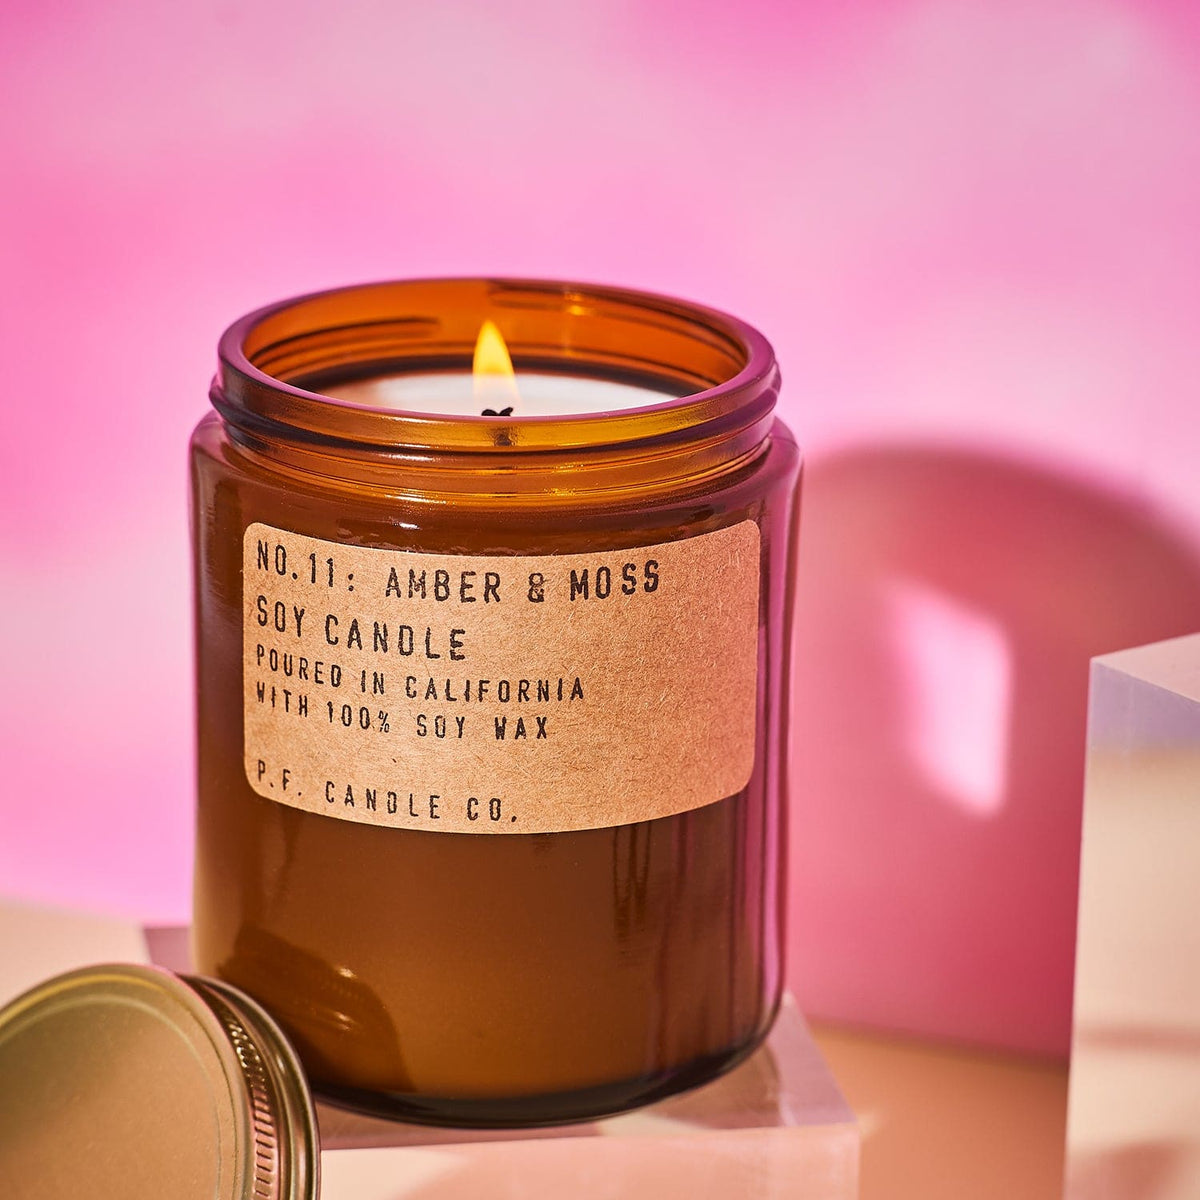 P.f. Candle Co. - Amber & Moss Candle - Candles - Dadday - 